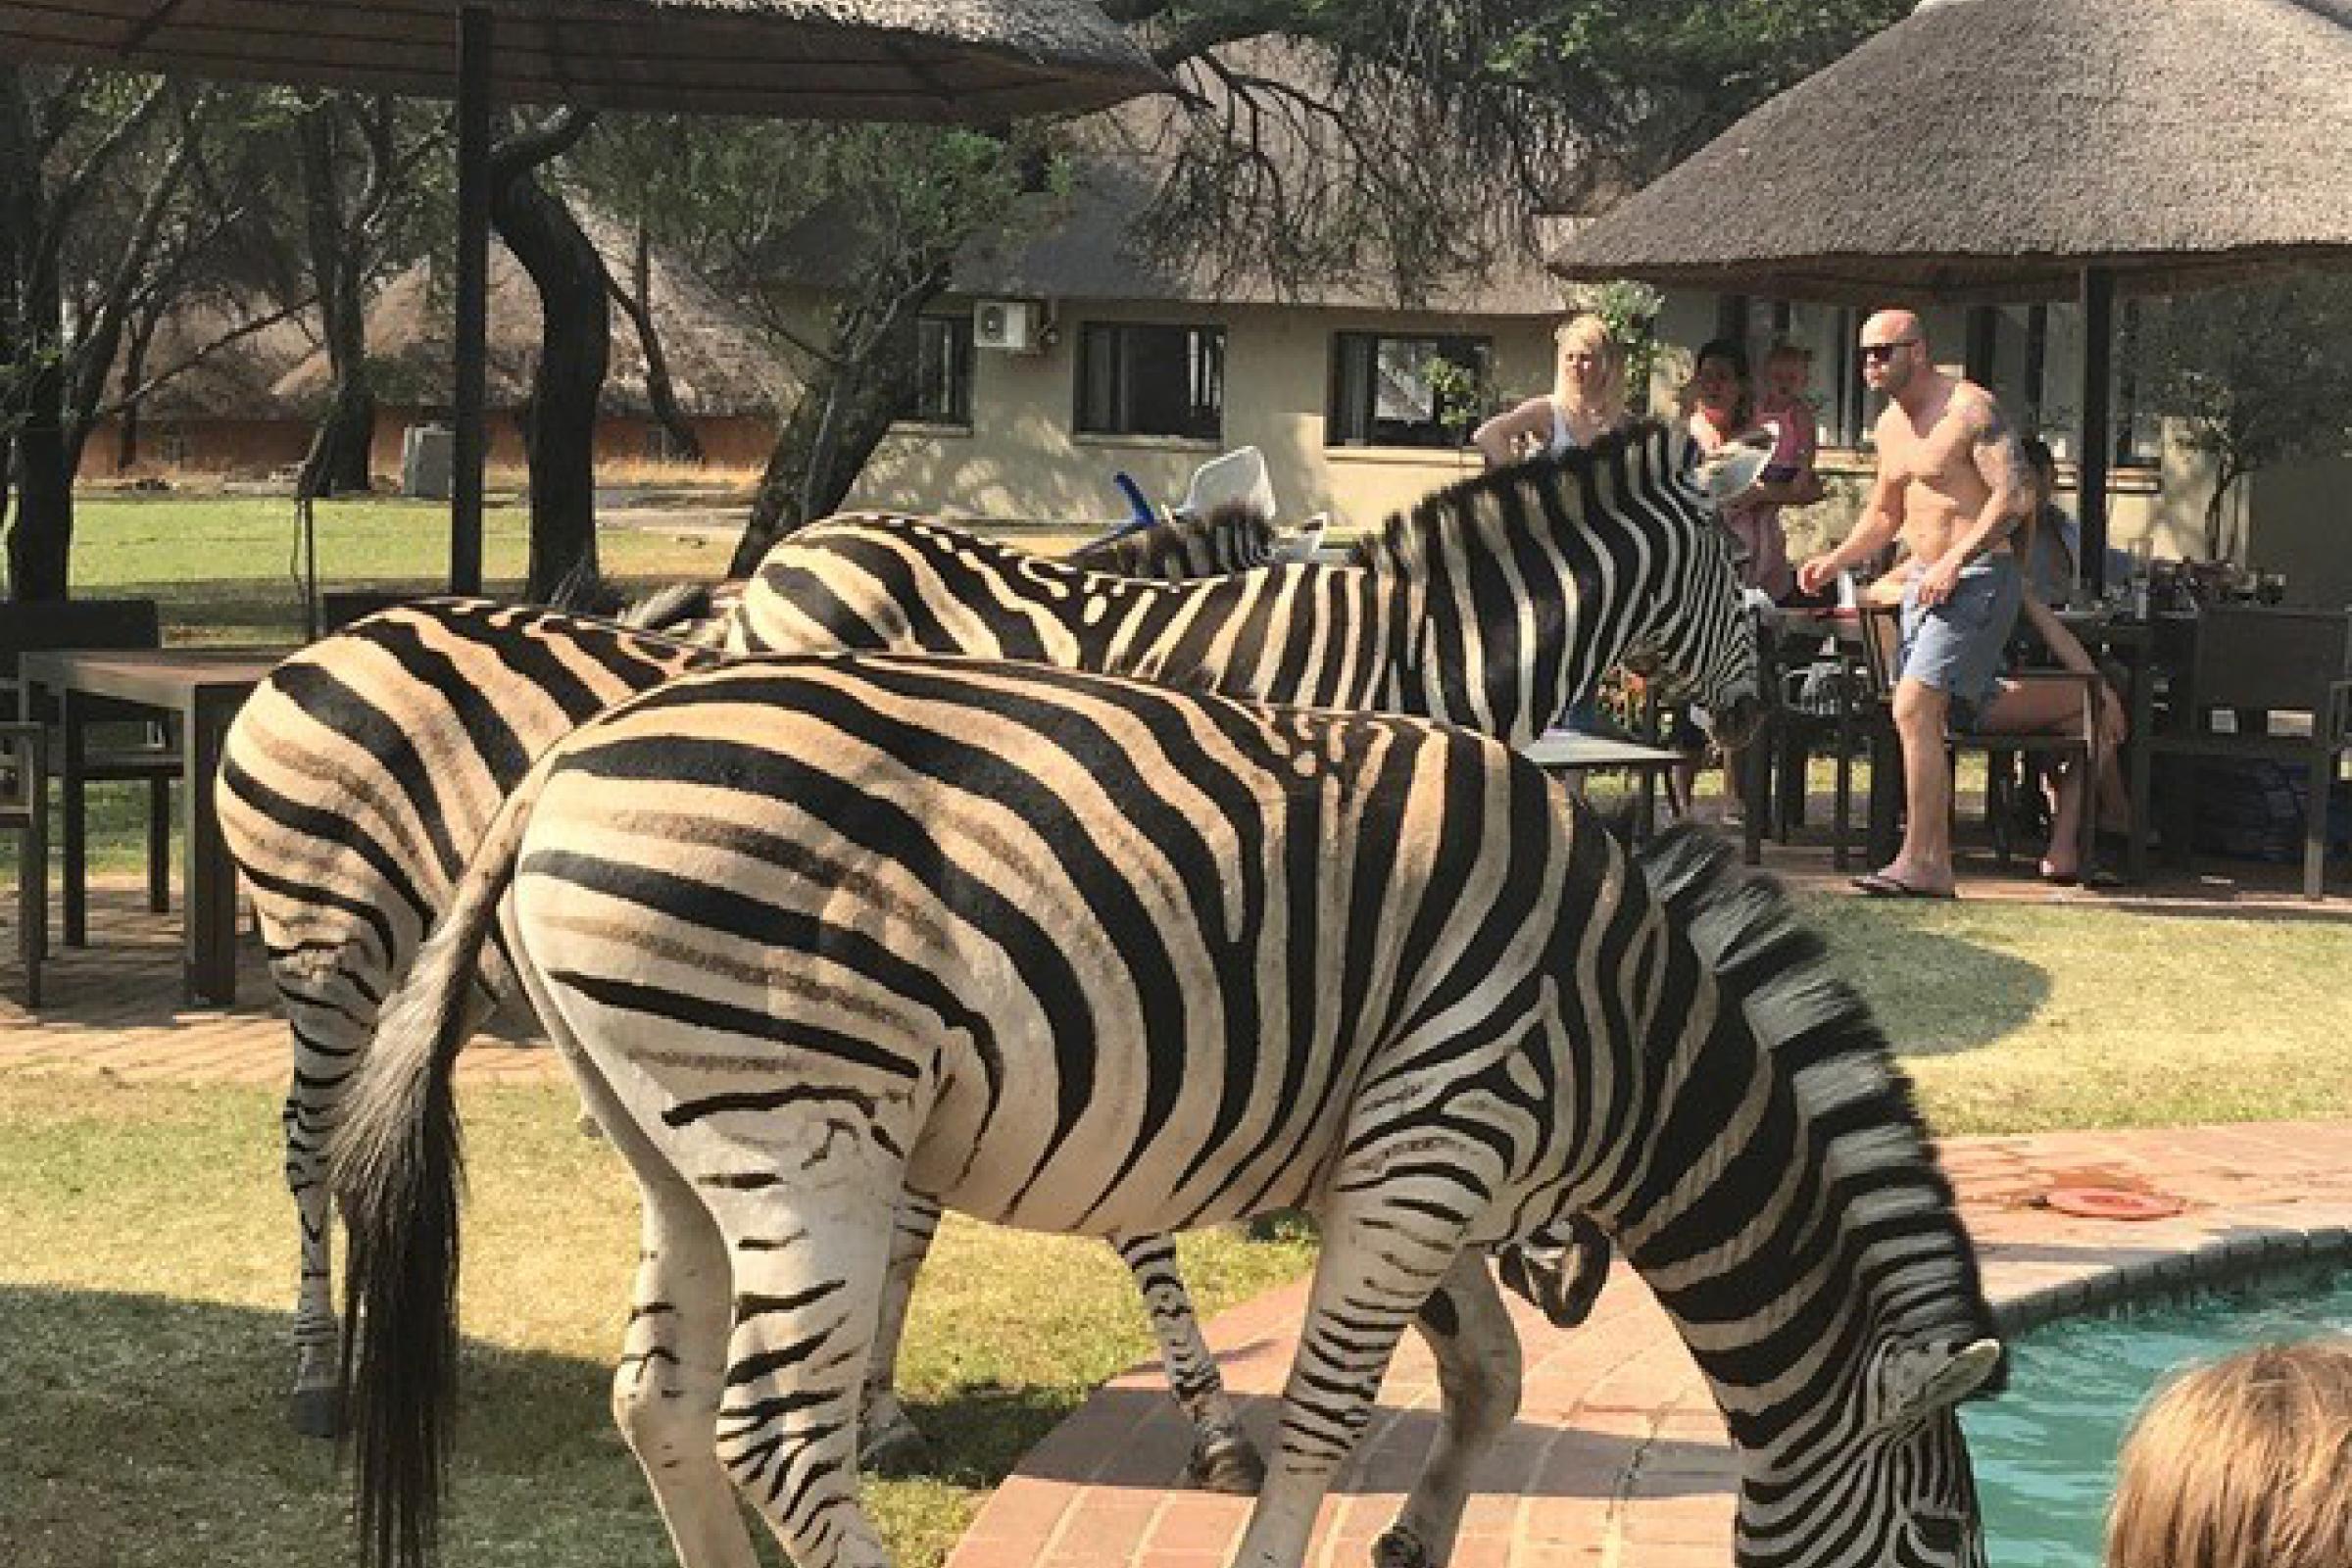 Zebras drinking from a swimming pool